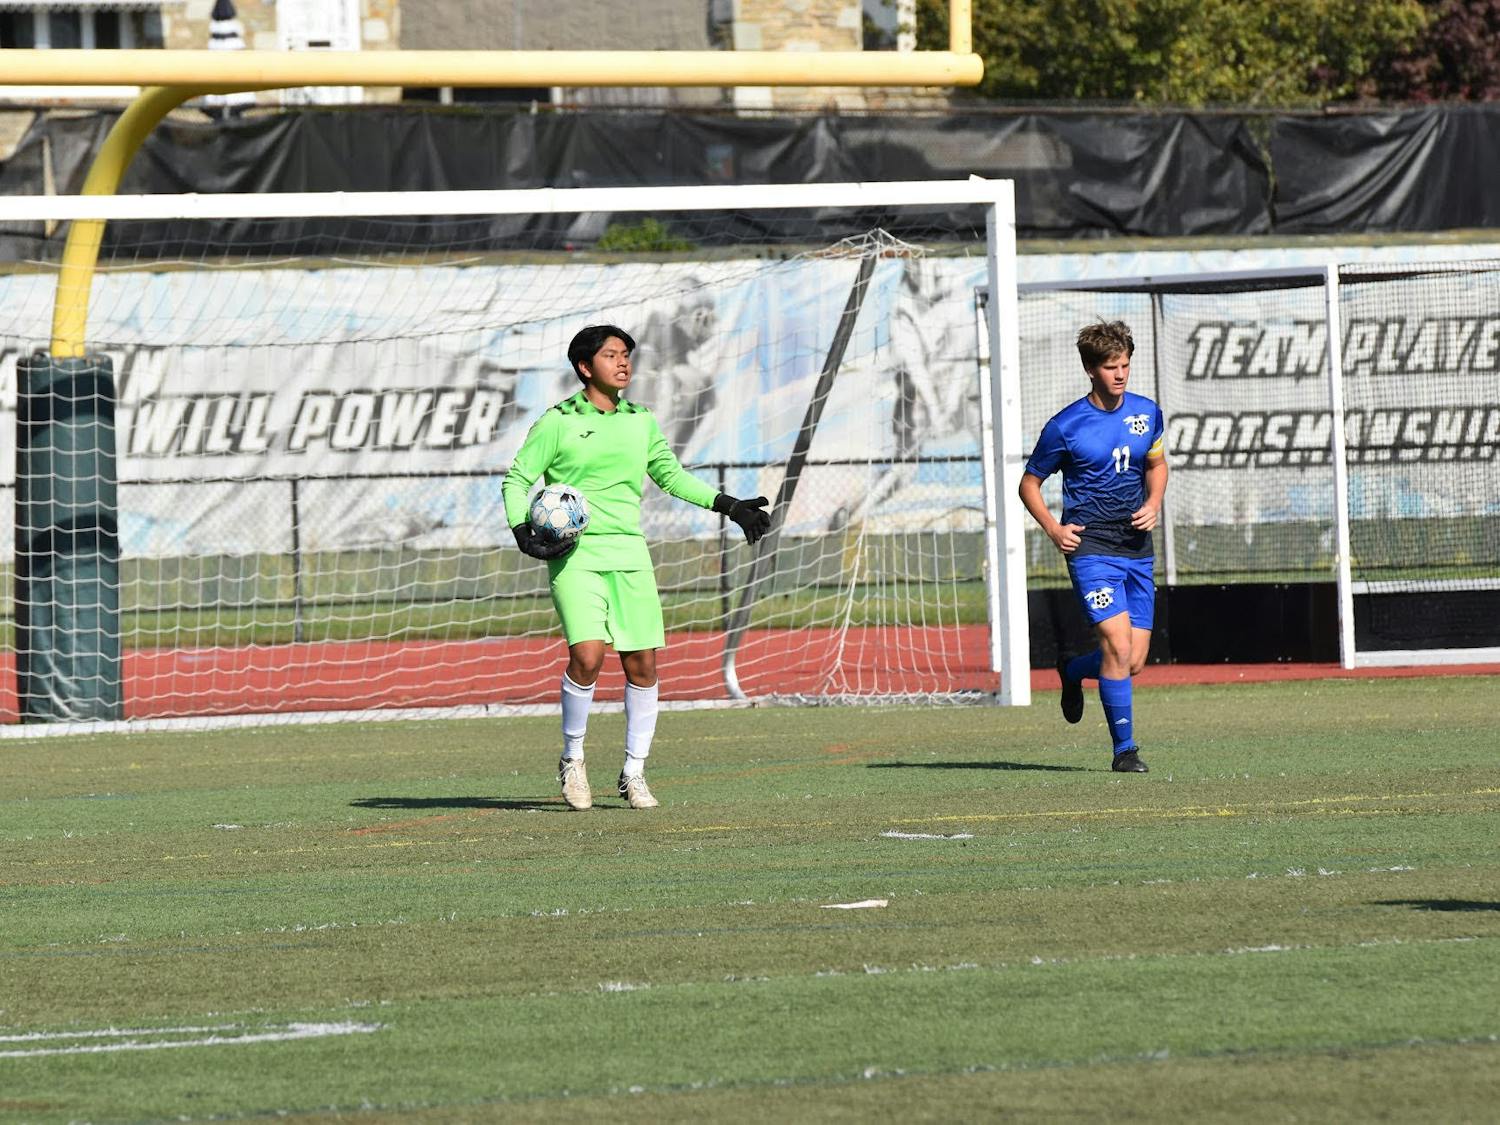 Masterman soccer players, from left: Nery Tlapaya, Owen Kingsley | Picture courtesy of Vahn Mahlab